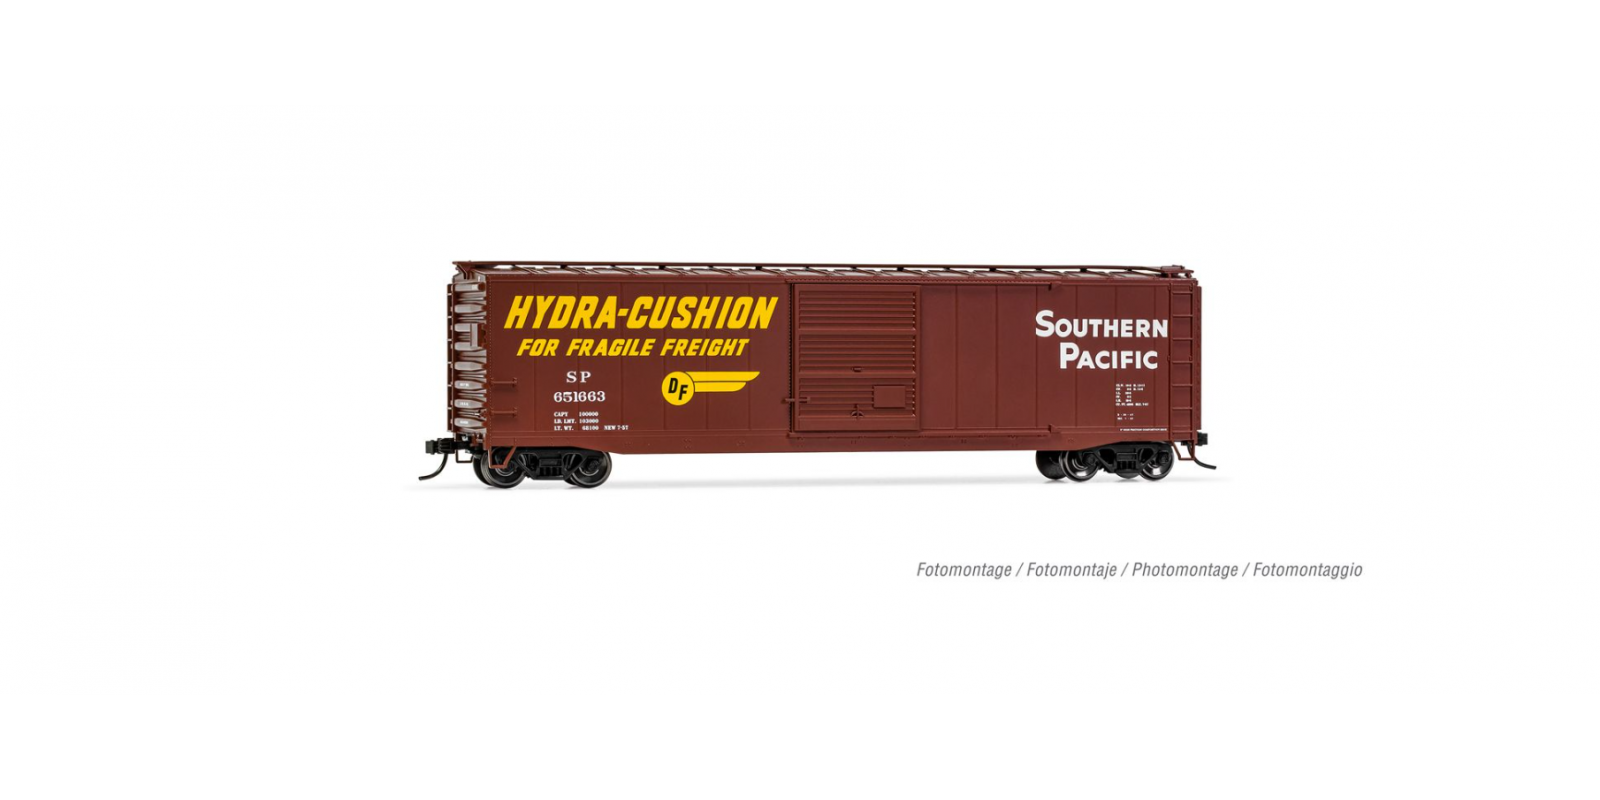 RI6585A Southern Pacific, Box Car, running number #1